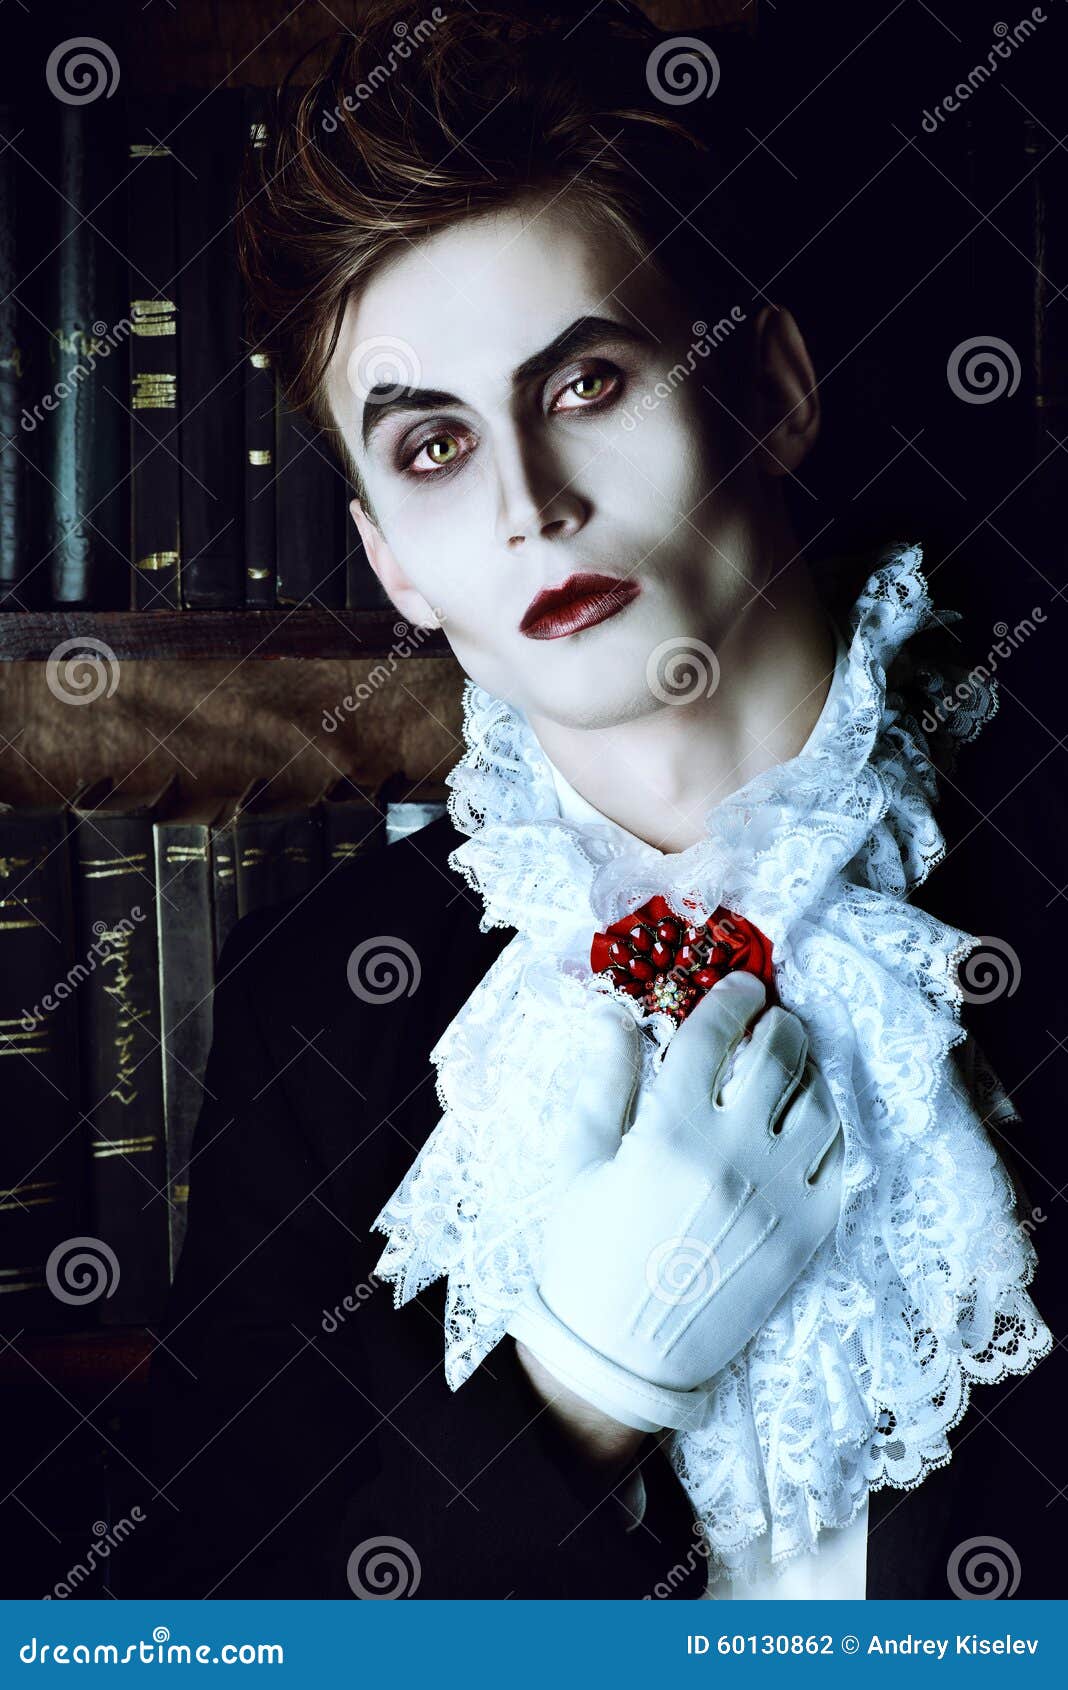 Dracula stock photo. Image of devilry, legend, handsome - 60130862